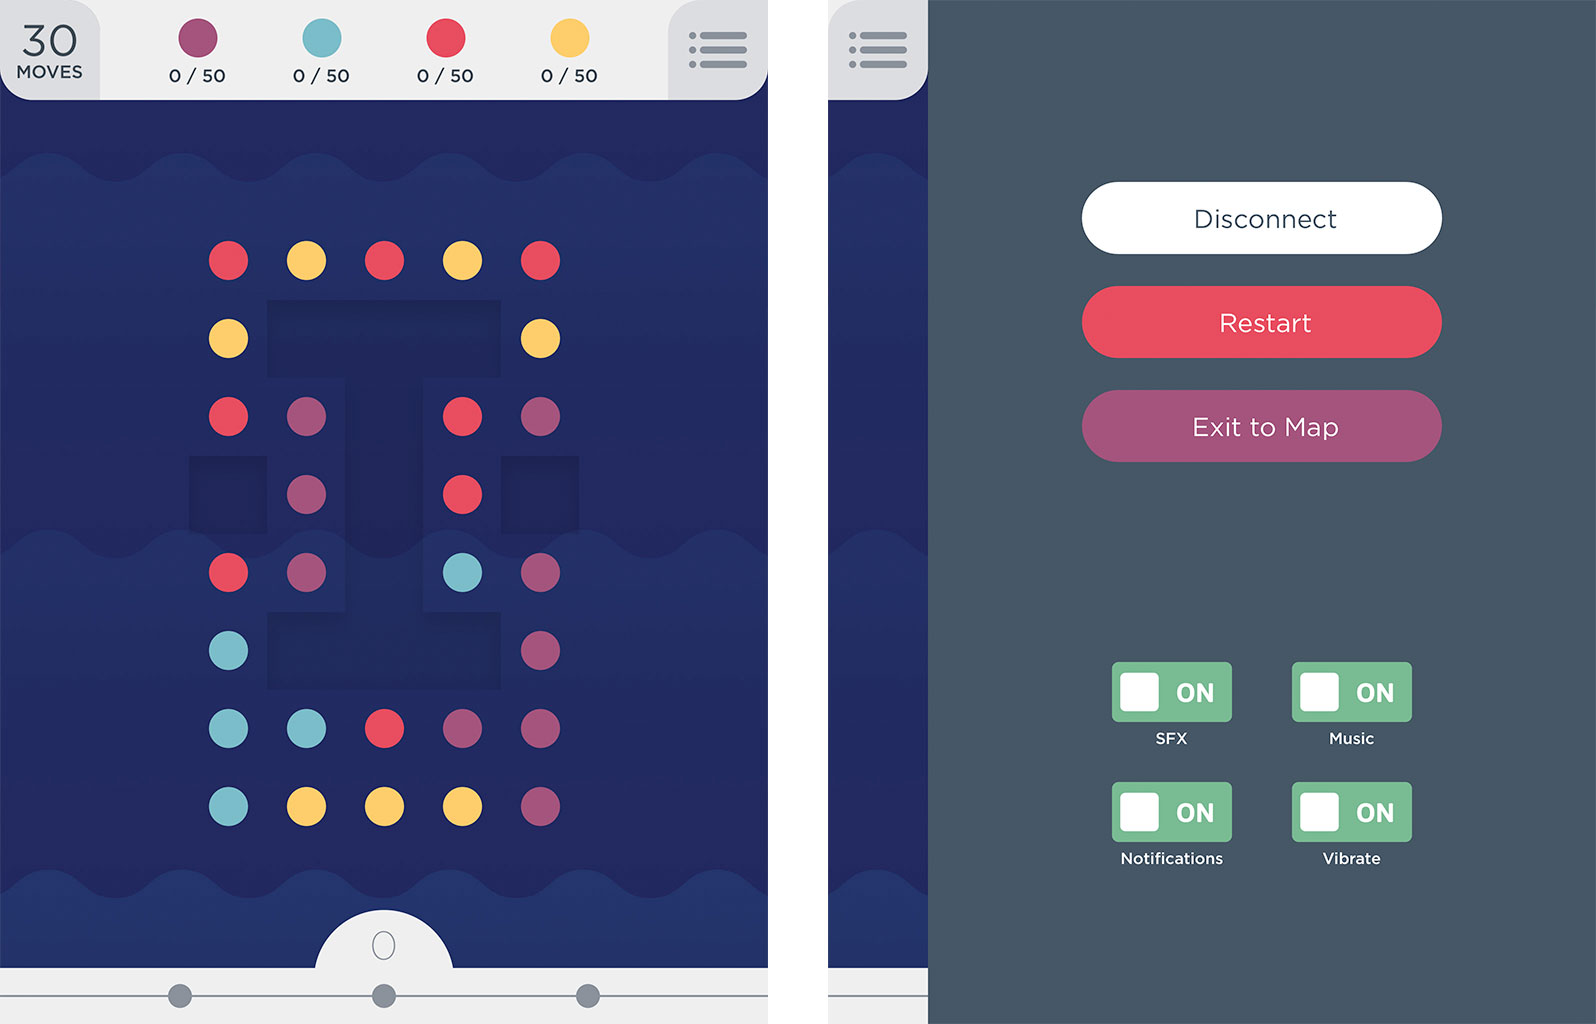 TwoDots: Top 10 tips, hints, and cheats you need to know!